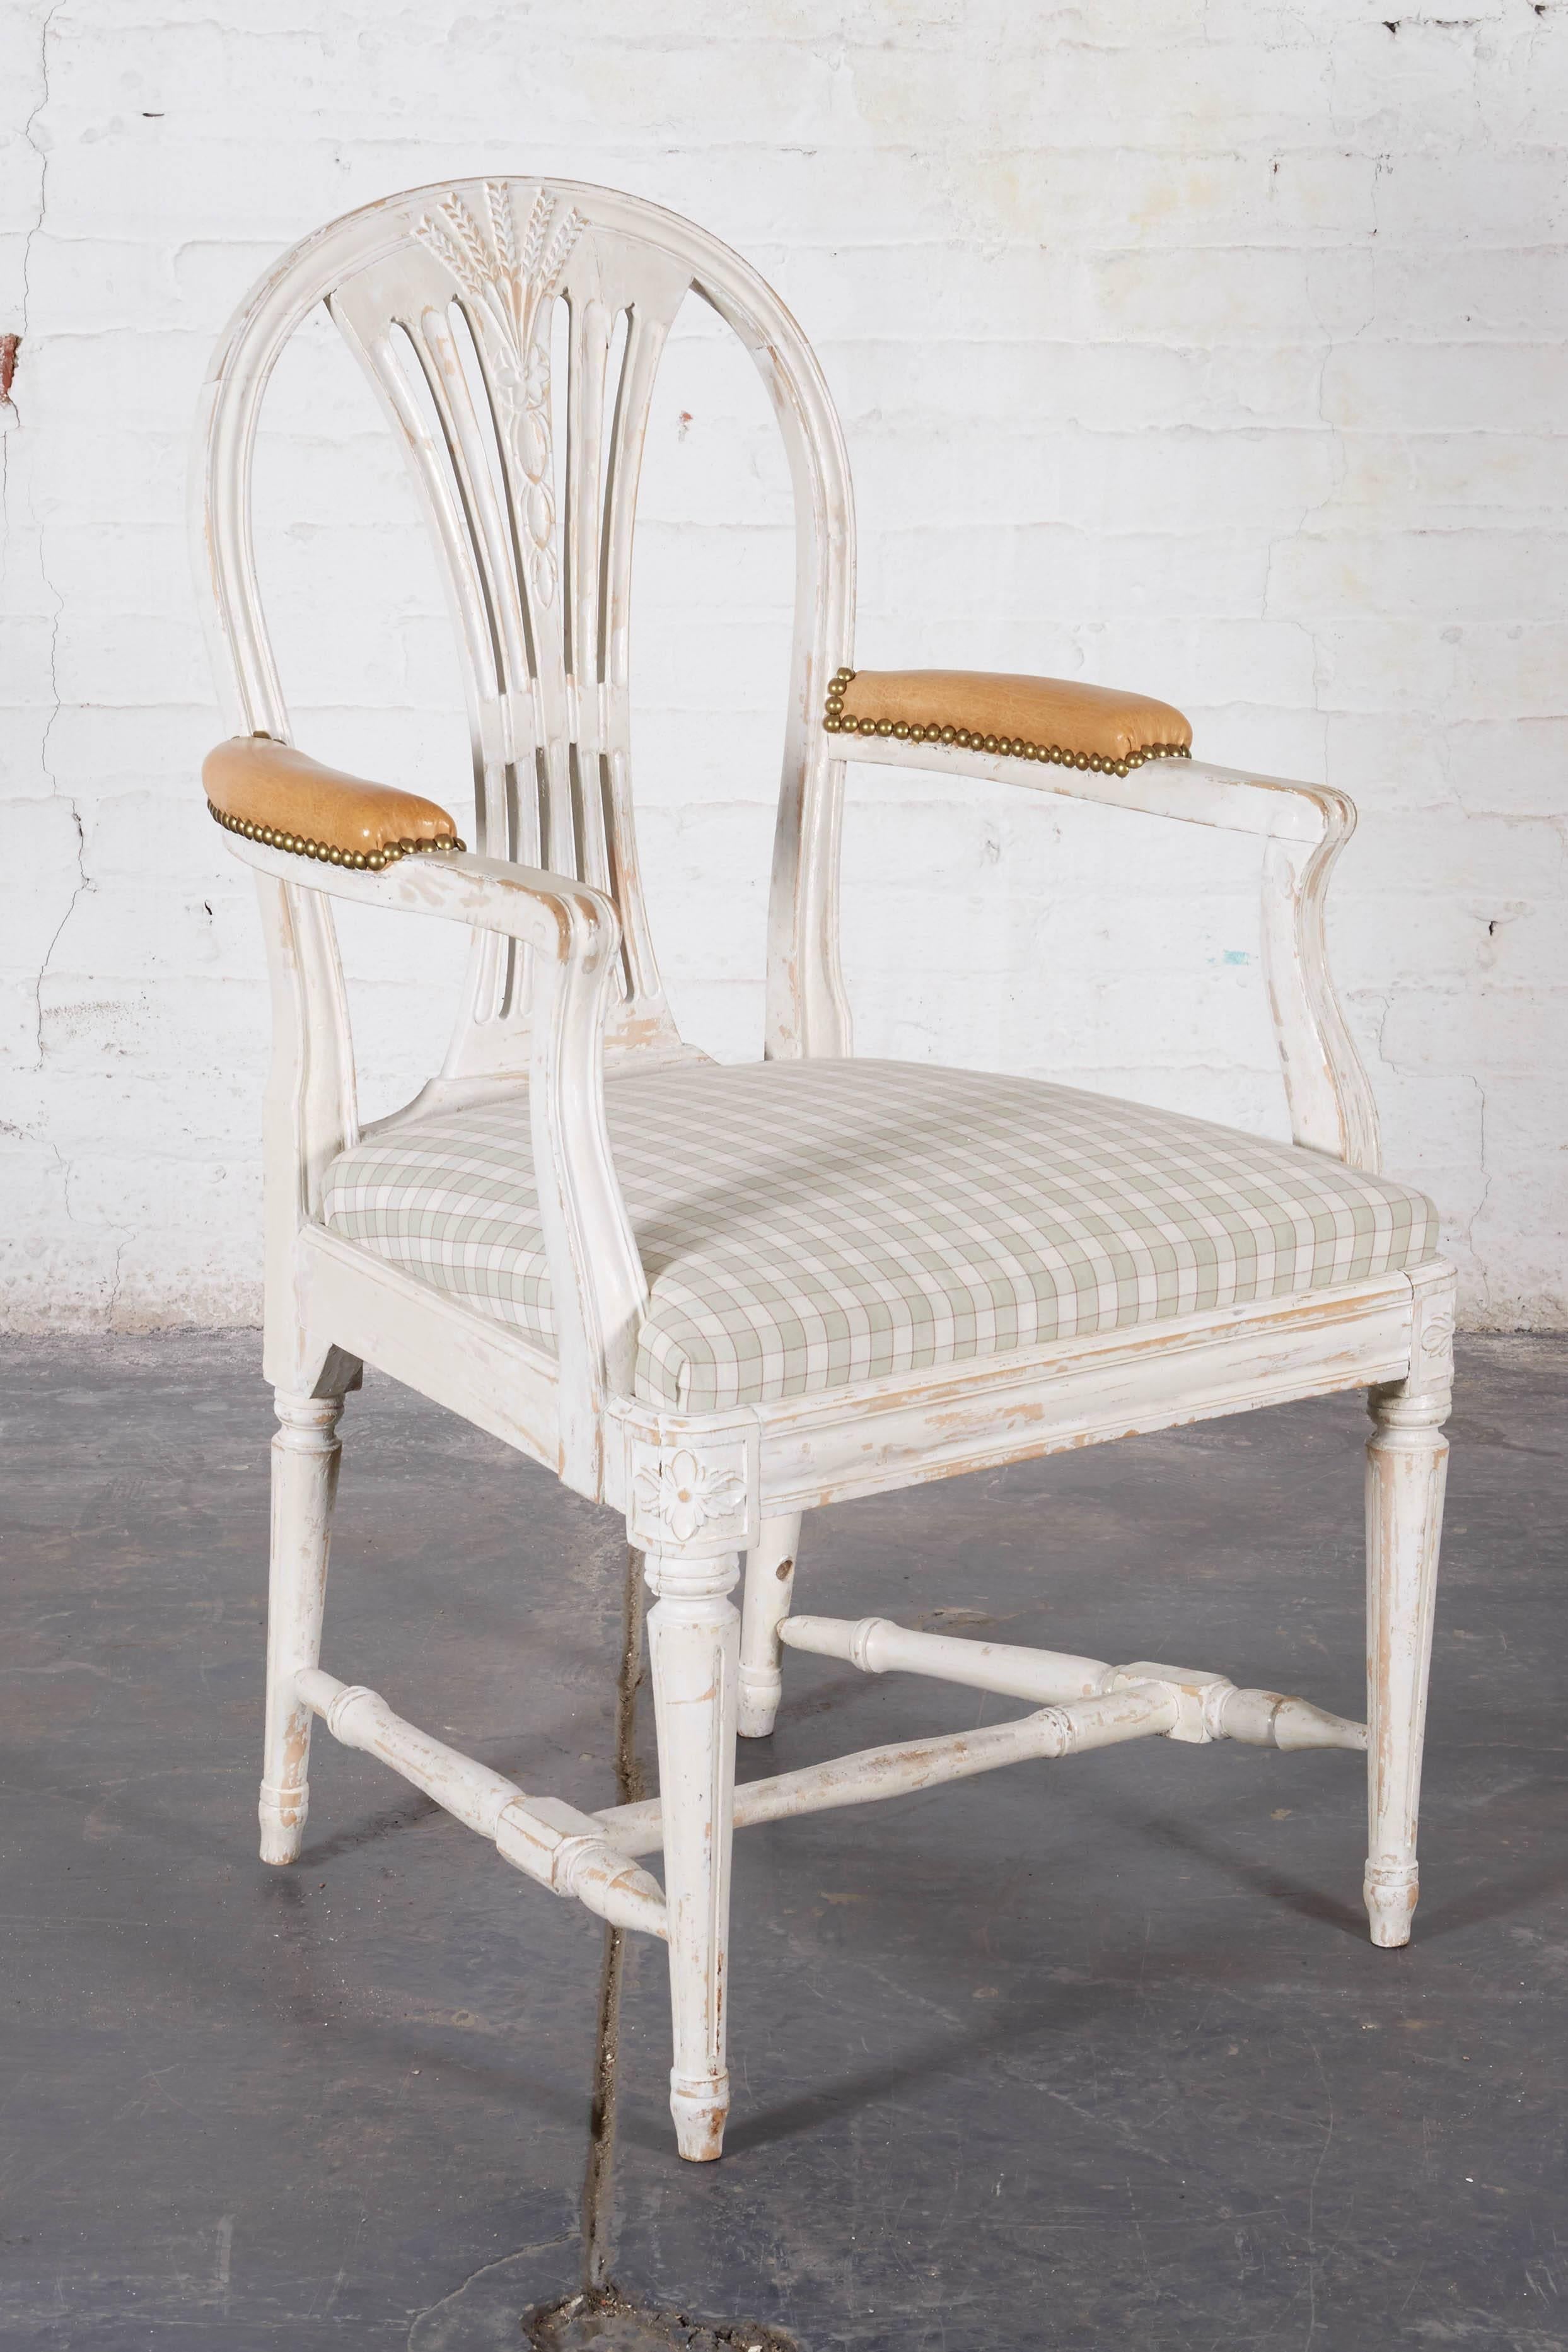 Conceived in the Sheraton/Hepplewhite style with arched back centred by a pierced backsplat with wheat sheath decoration; the armrests with tan leather manchettes; the drop-in seat upholstered in a cotton check; raised on turned tapering legs joined